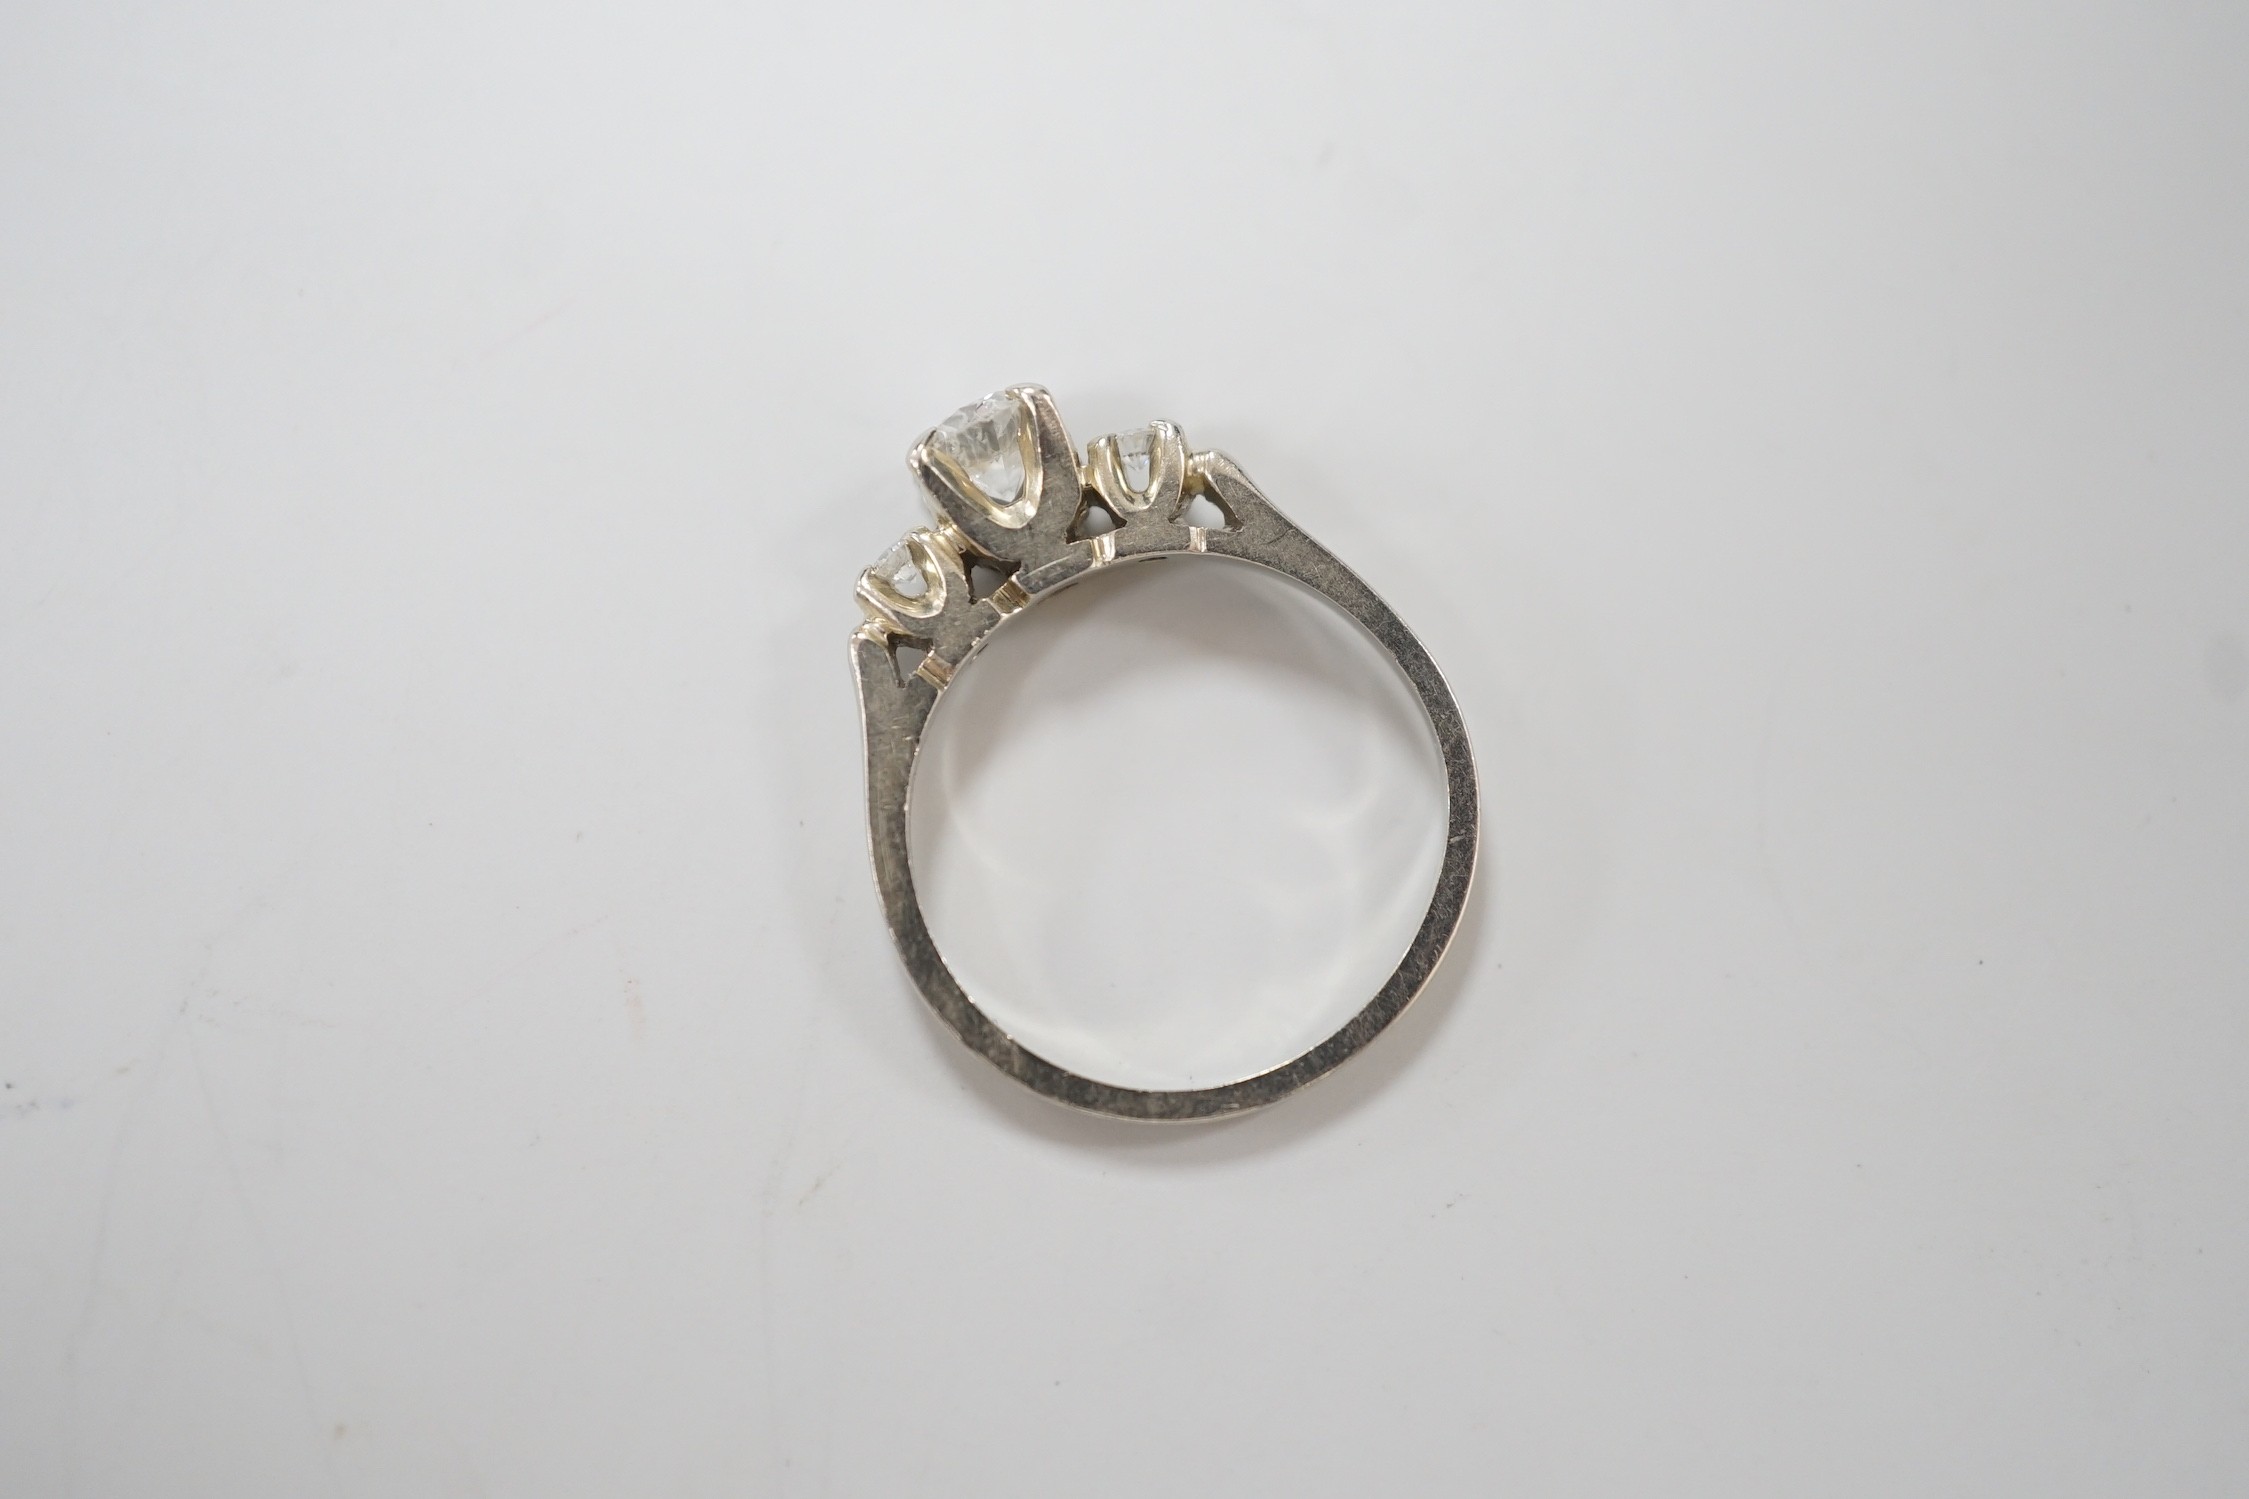 A Canadian Birks 18k white metal and single stone diamond ring, with diamond set shoulders, size H, gross weight 2.7 grams